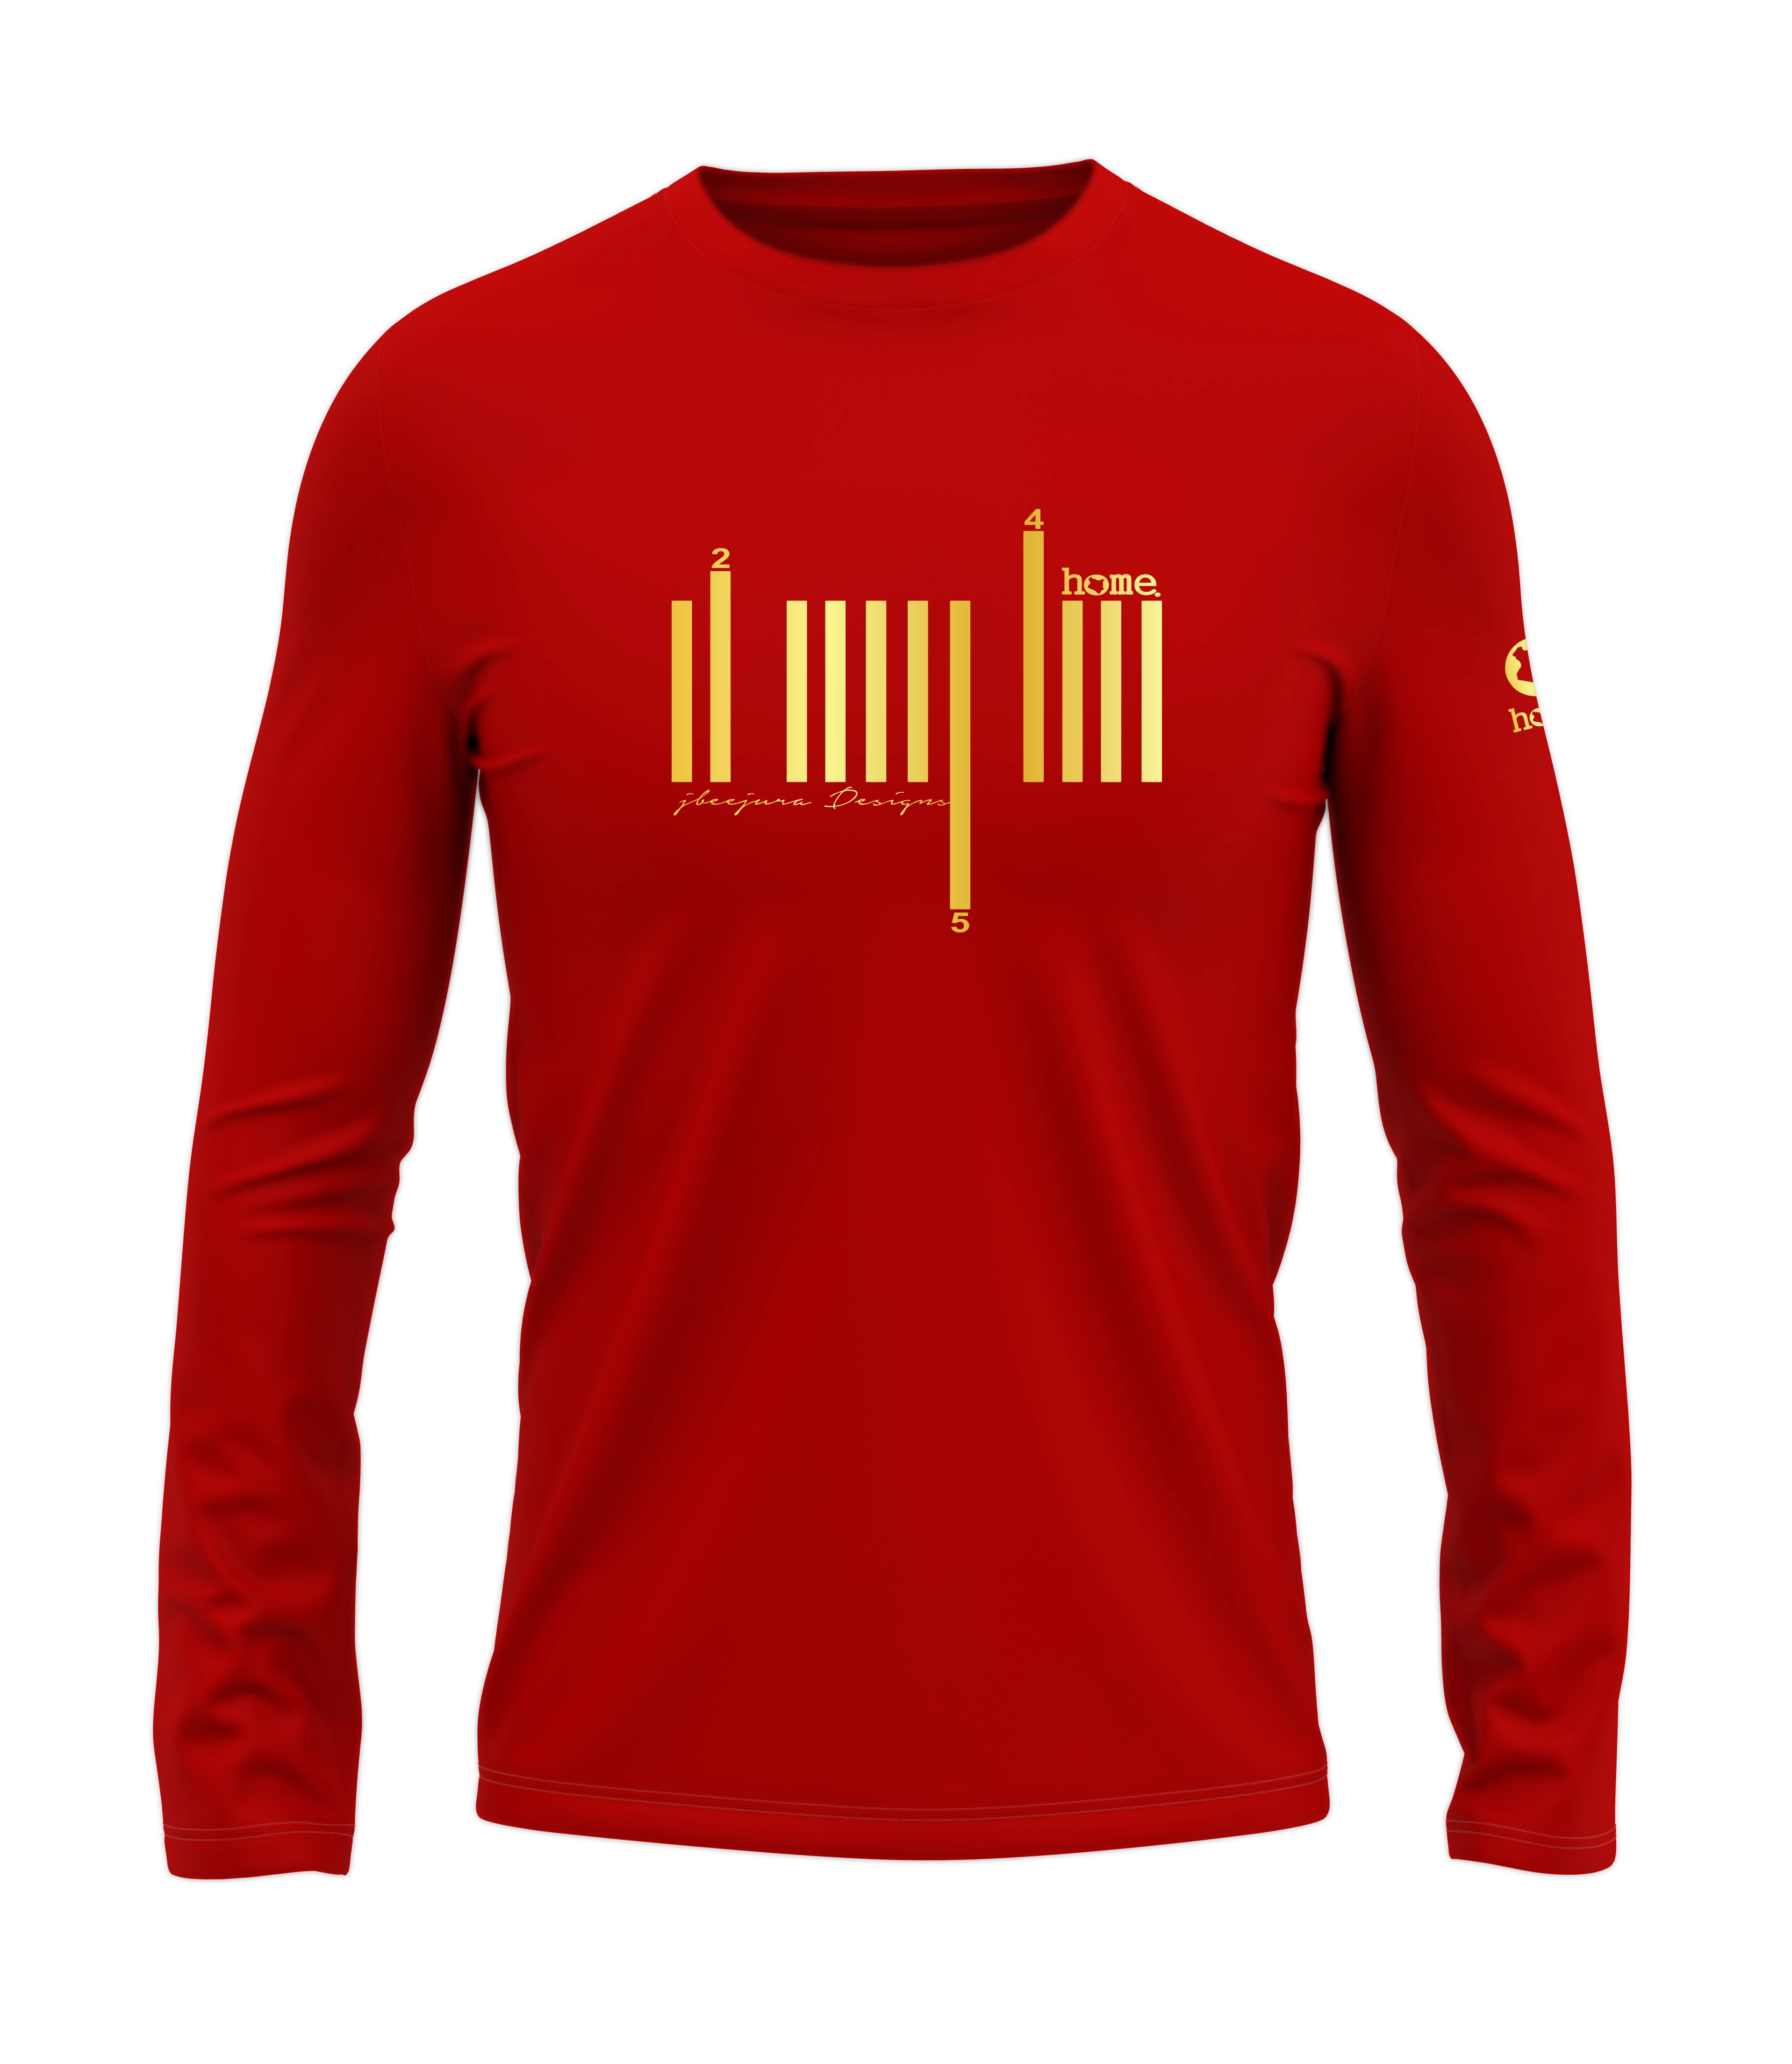 home_254 LONG-SLEEVED RED T-SHIRT WITH A GOLD BARS PRINT – COTTON PLUS FABRIC